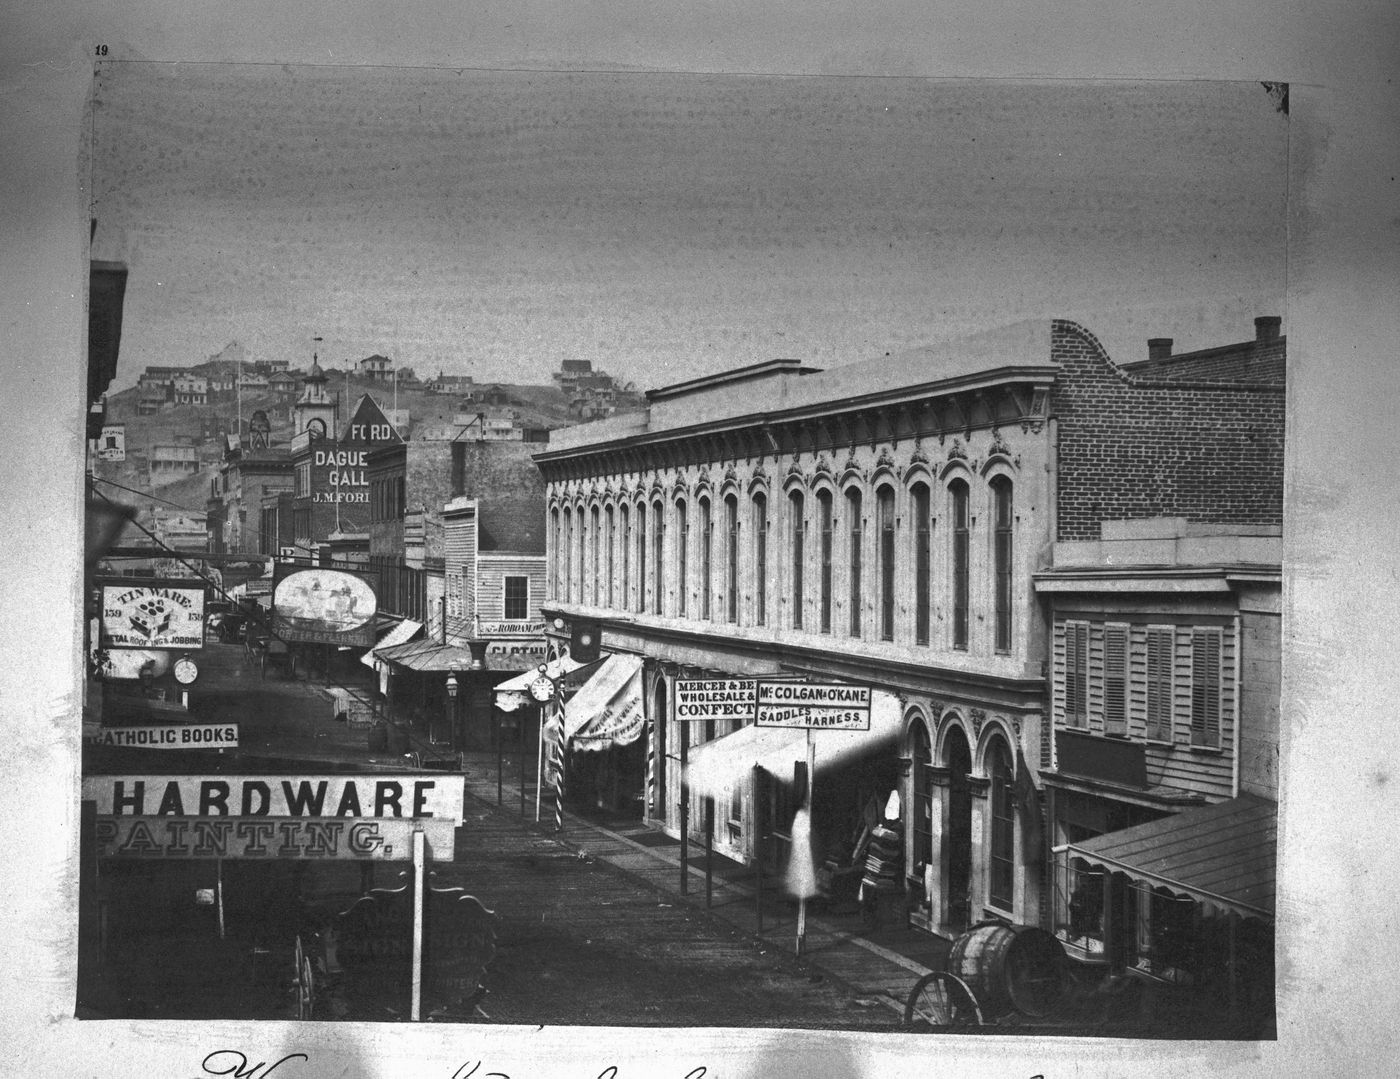 View of Kearny Street showing stores, San Francisco